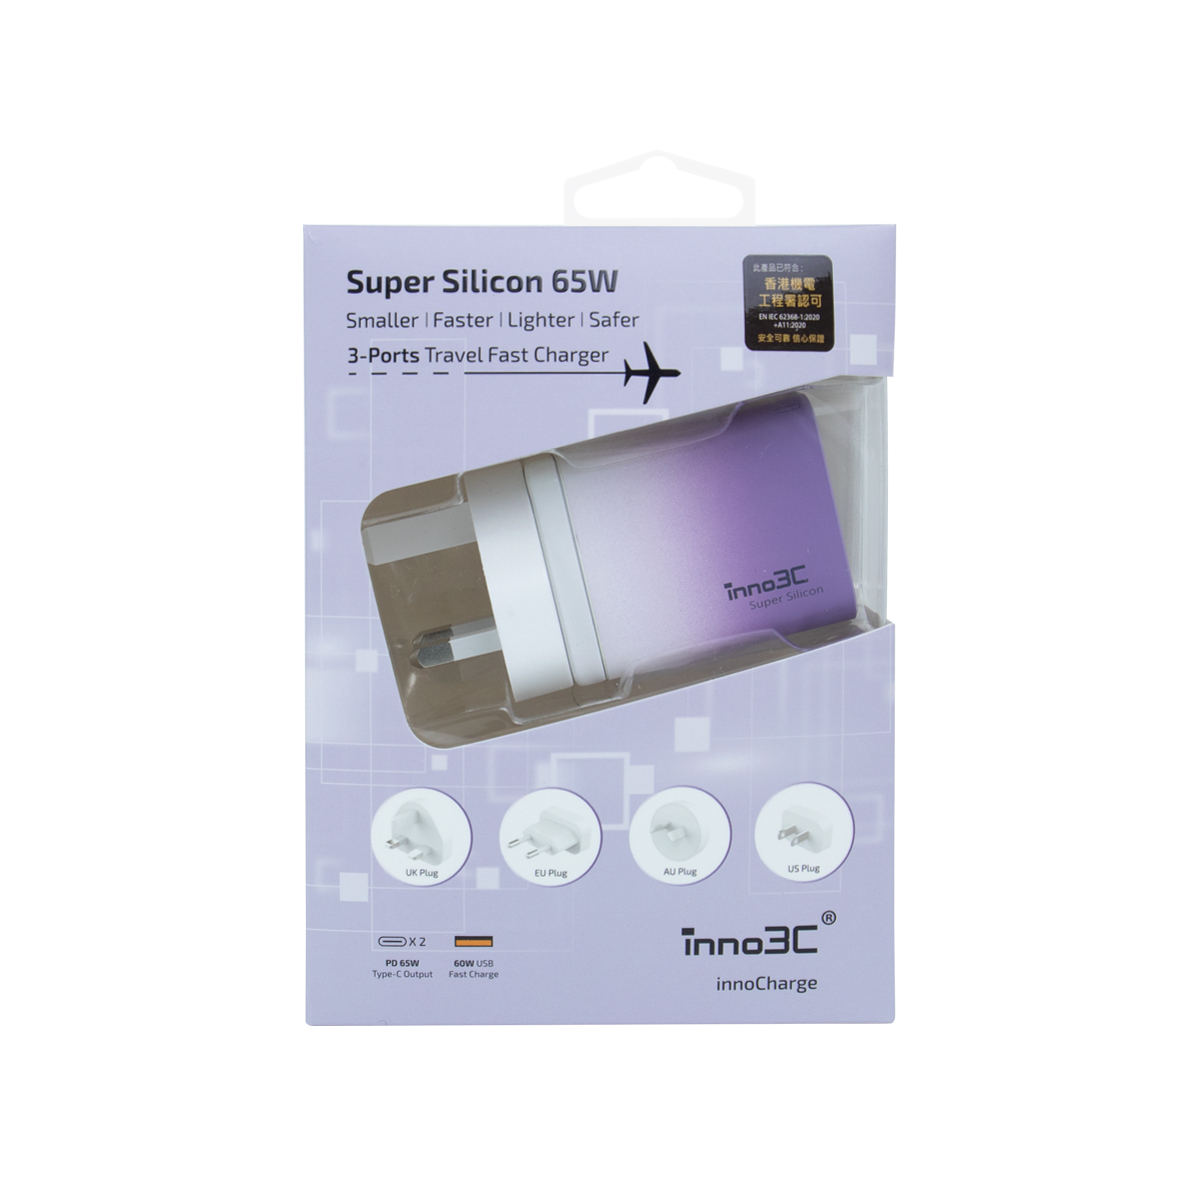 inno3C i-65WT Super Silicon 65W 3-Ports Travel Fast Charger (Deep Purple Gradient), , large image number 4